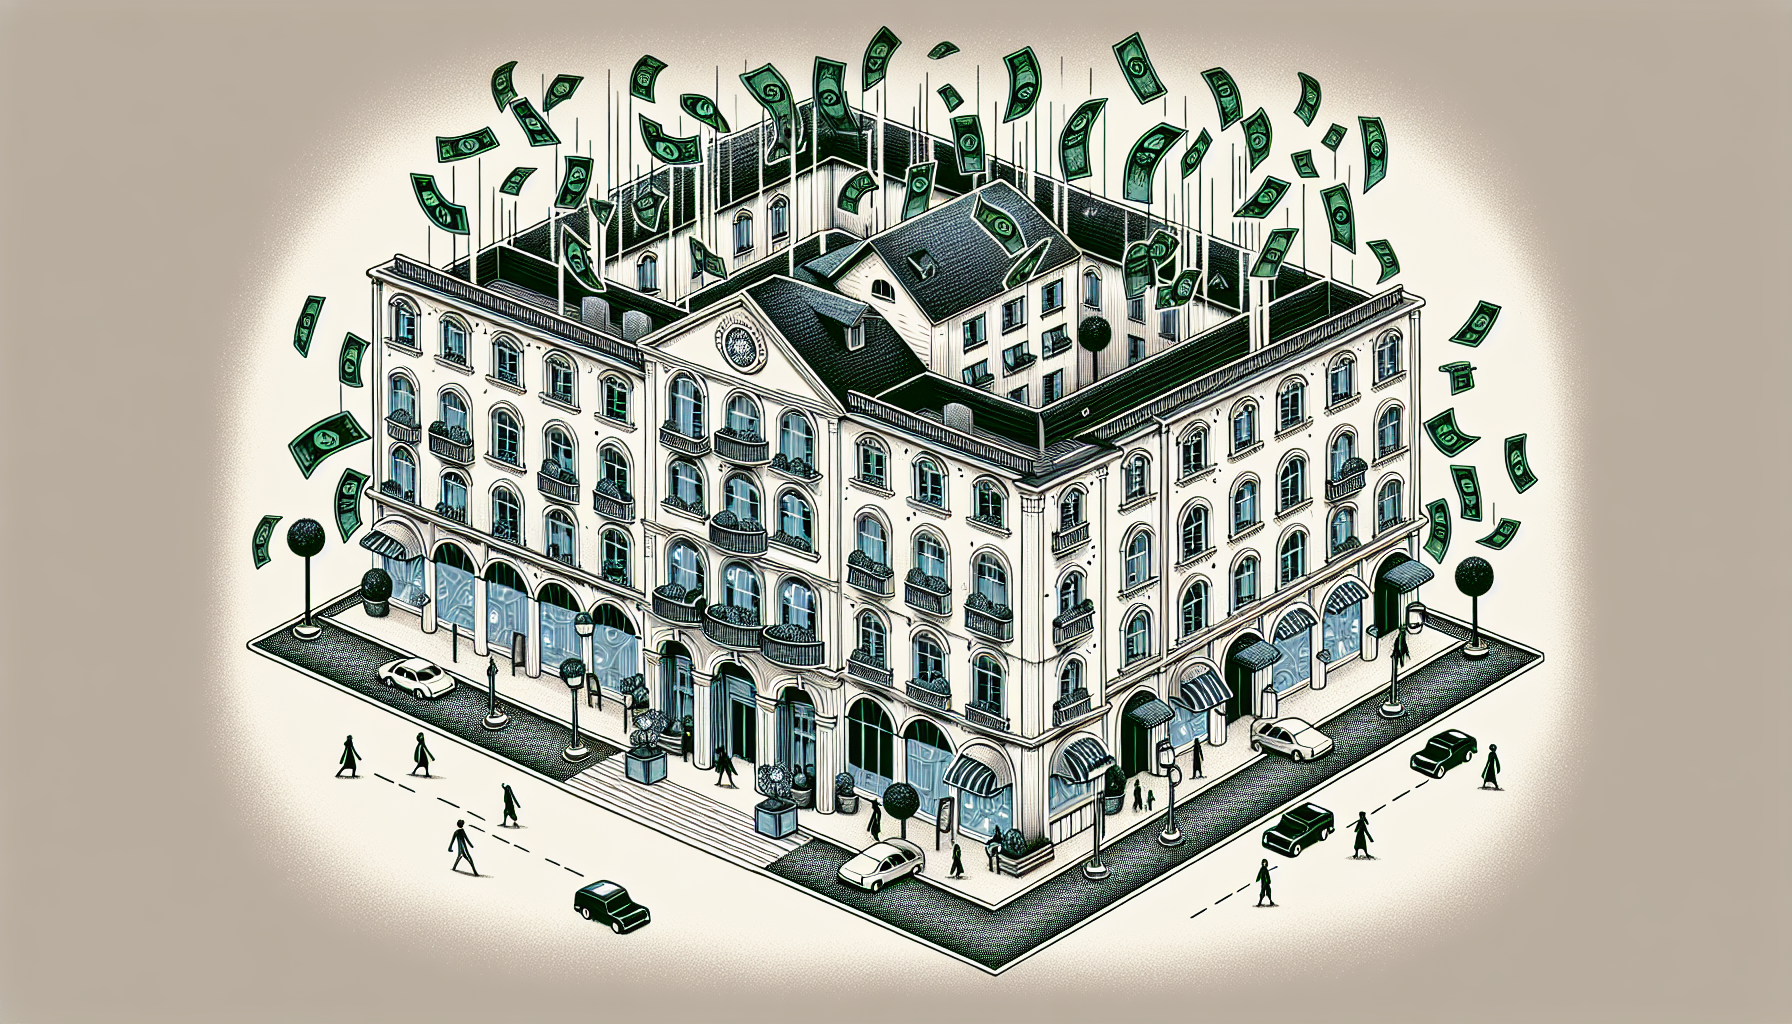 Illustration of a property with cash flow